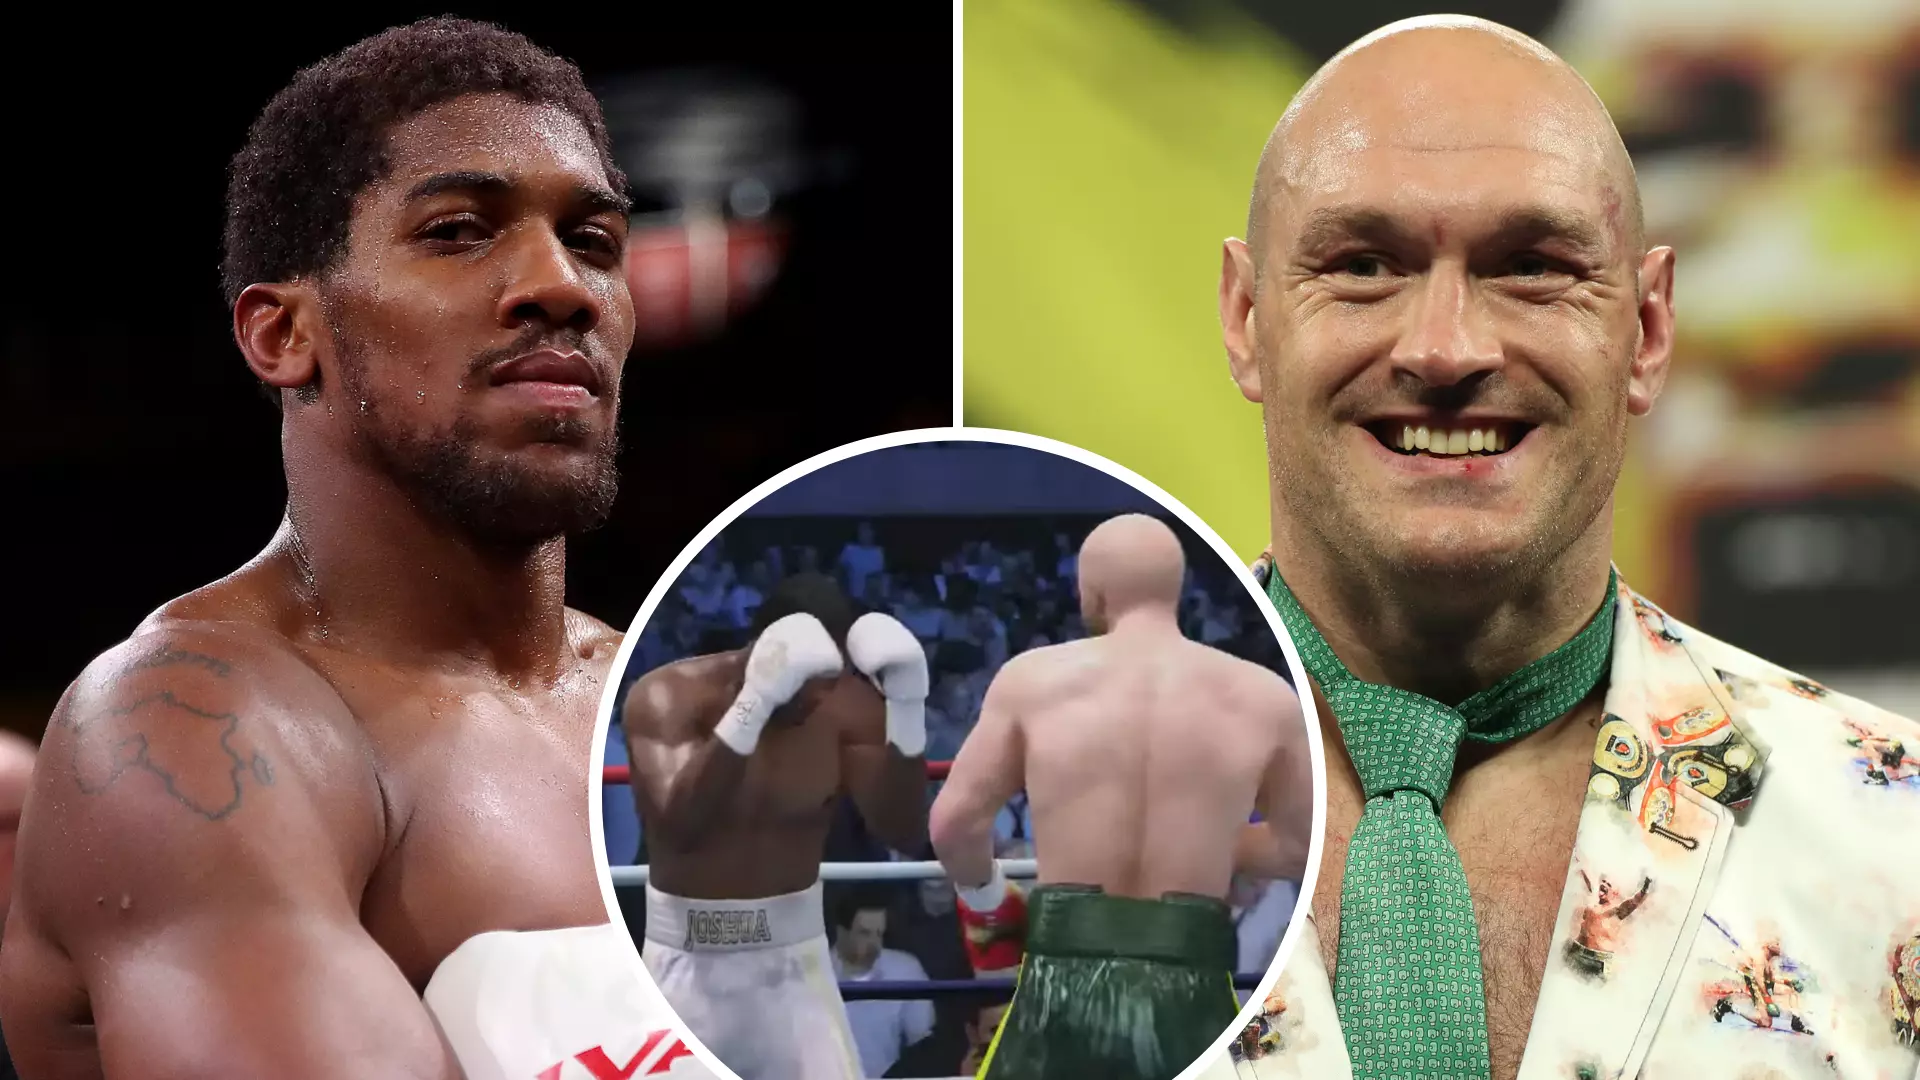 Tyson Fury Vs Anthony Joshua Mega-Fight Simulated, Only One Fighter Gets Knocked Down